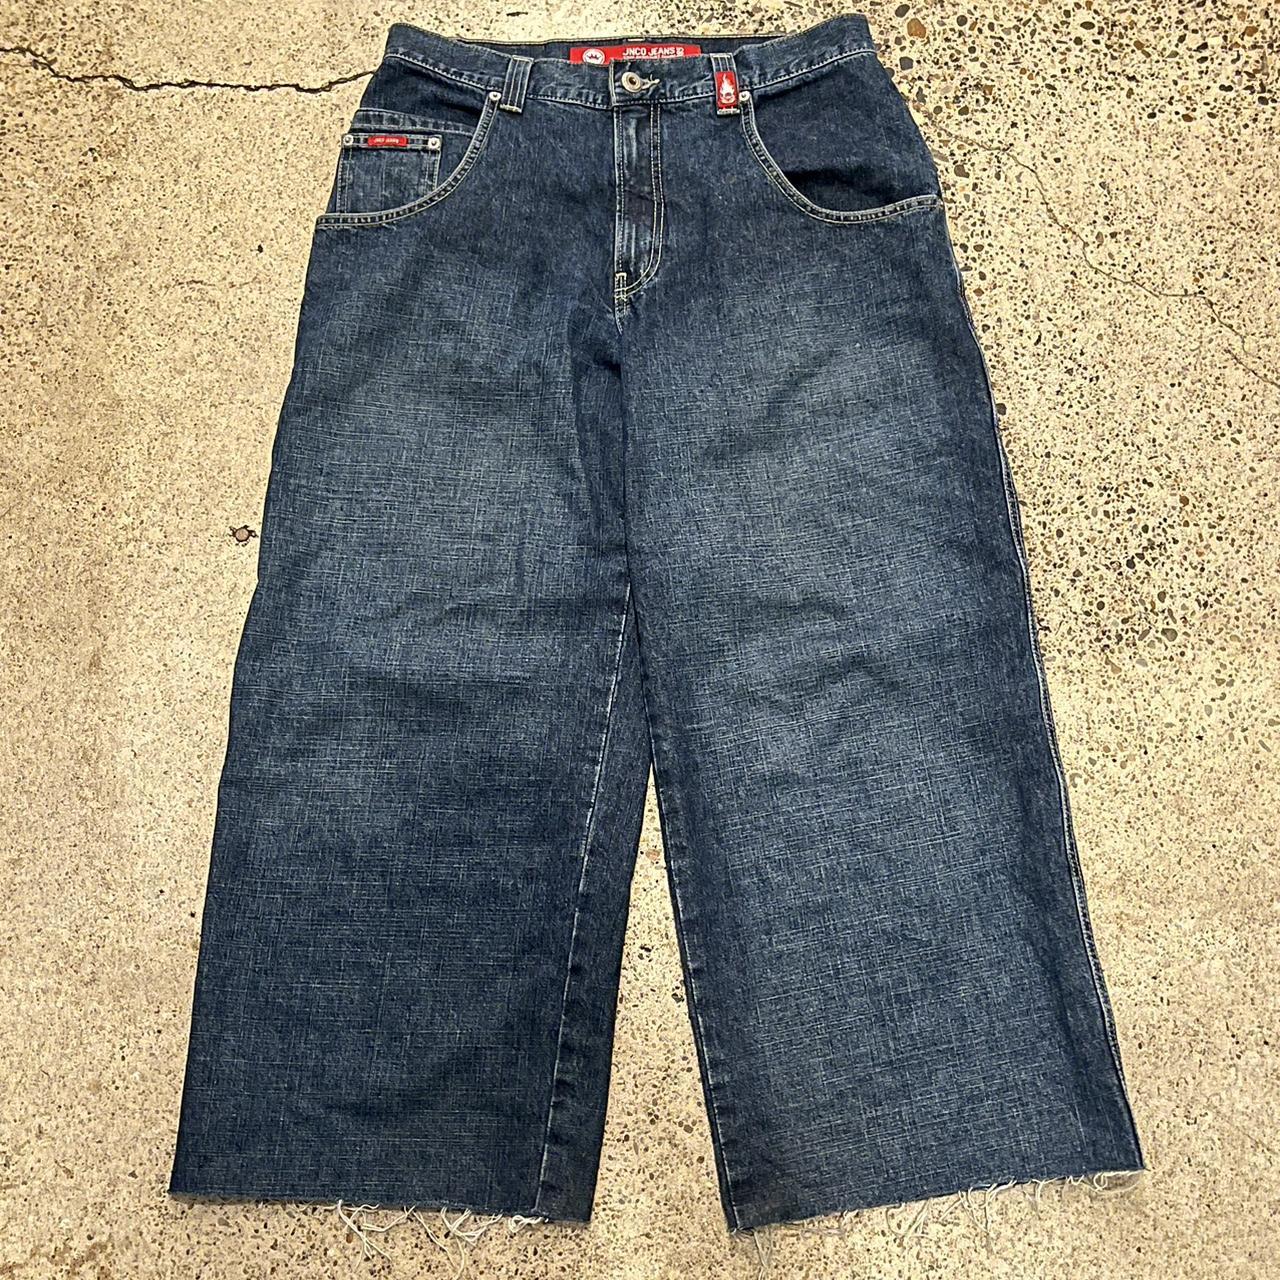 JNCO Men's Blue and Red Jeans | Depop